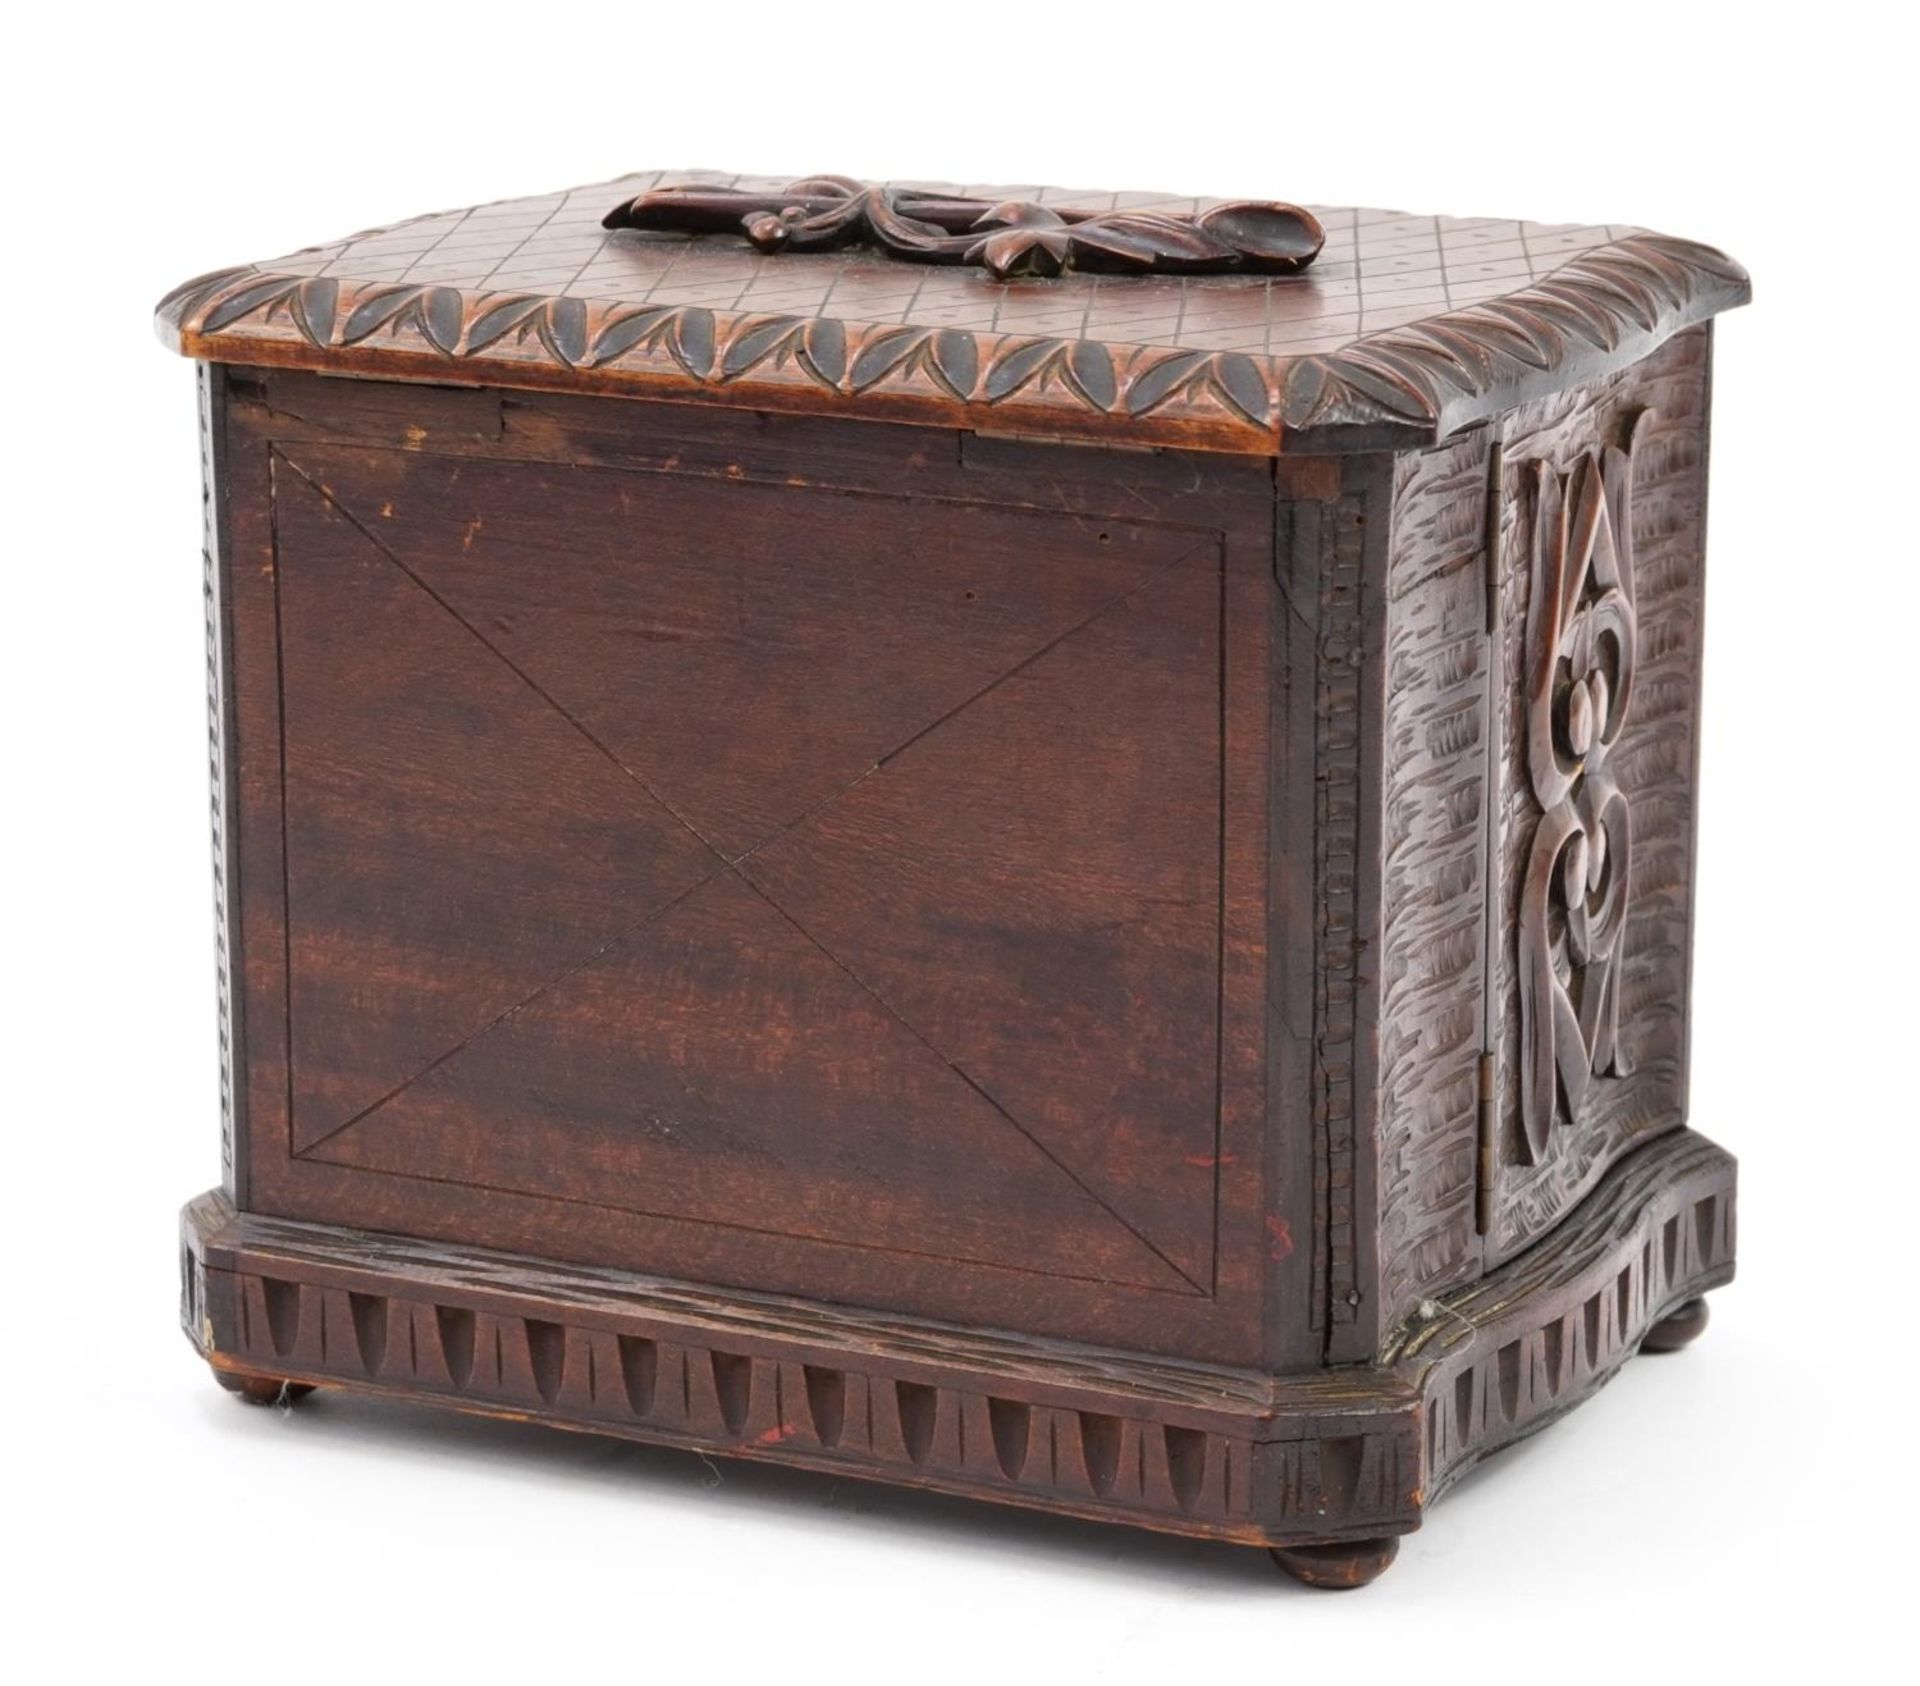 Black Forest carved wood smoker's pipe box with base drawer, 18.5cm H x 21.5cm W x 17.5cm D - Image 3 of 4